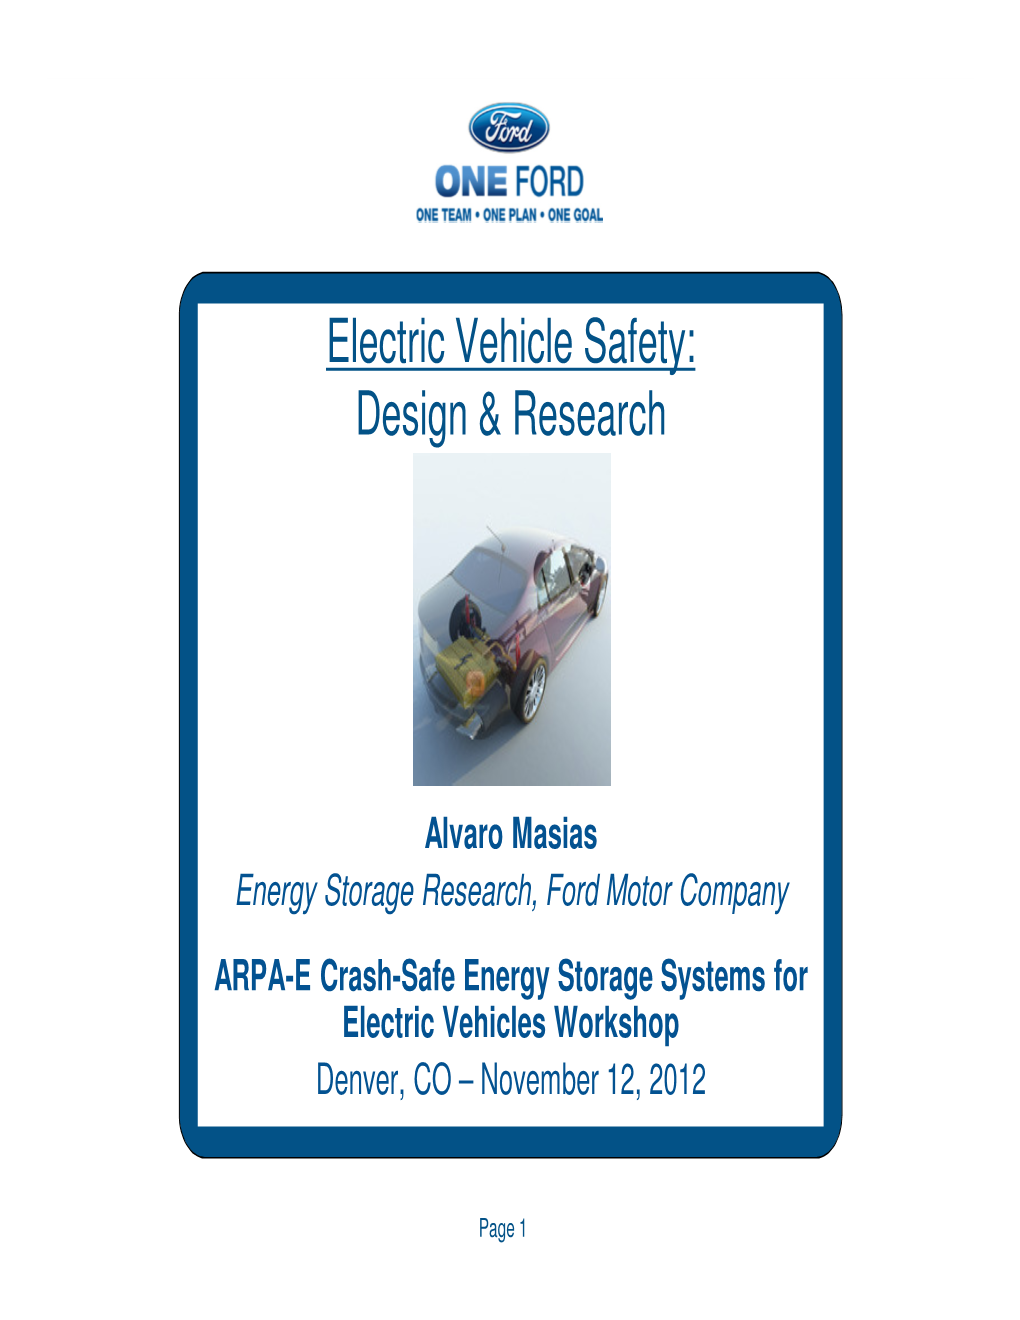 Electric Vehicle Safety: Design & Research